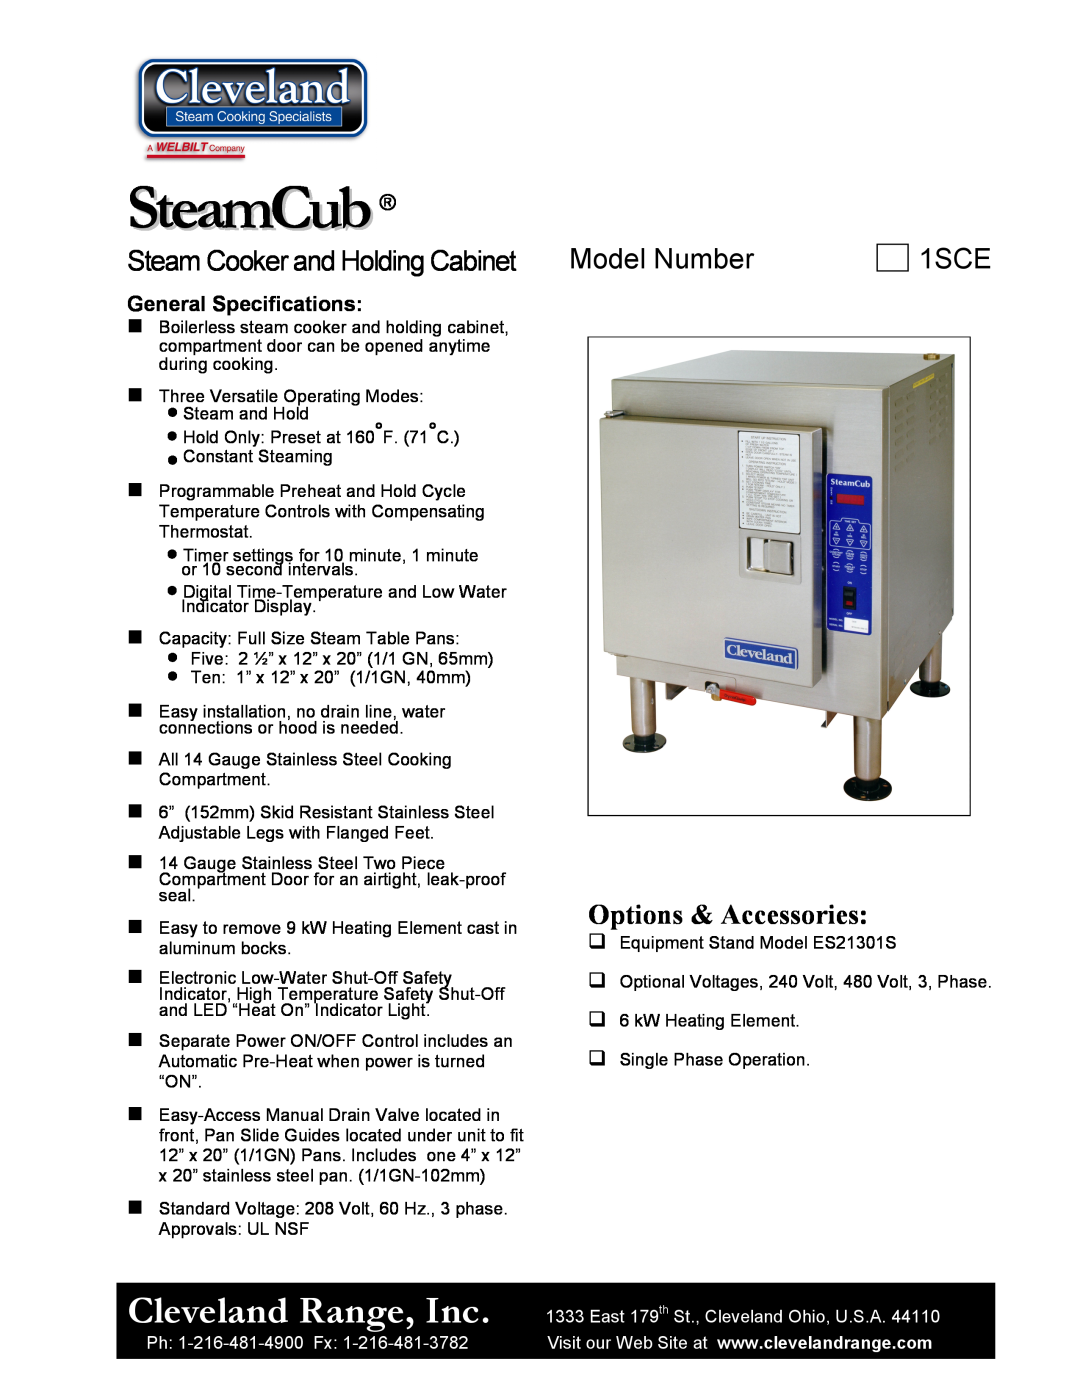 Cleveland Range 1SCE SteamCub, Cleveland Range, Inc, Model Number, Options & Accessories, Steam Cooker and Holding Cabinet 